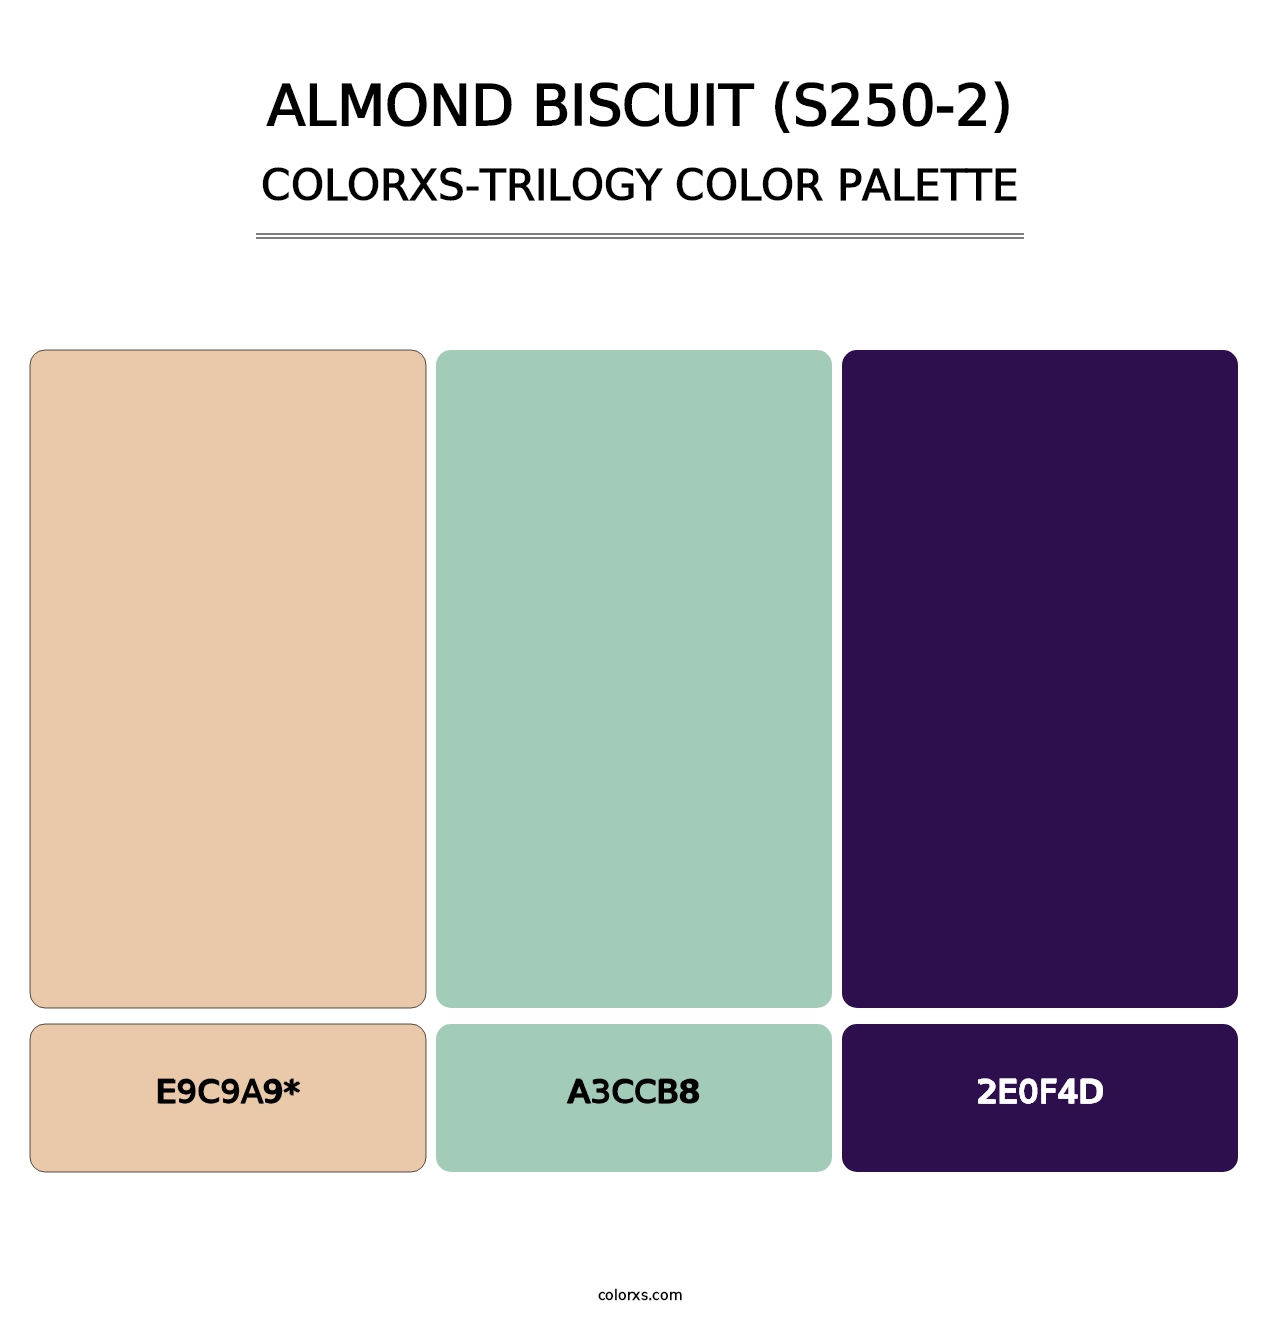 Almond Biscuit (S250-2) - Colorxs Trilogy Palette